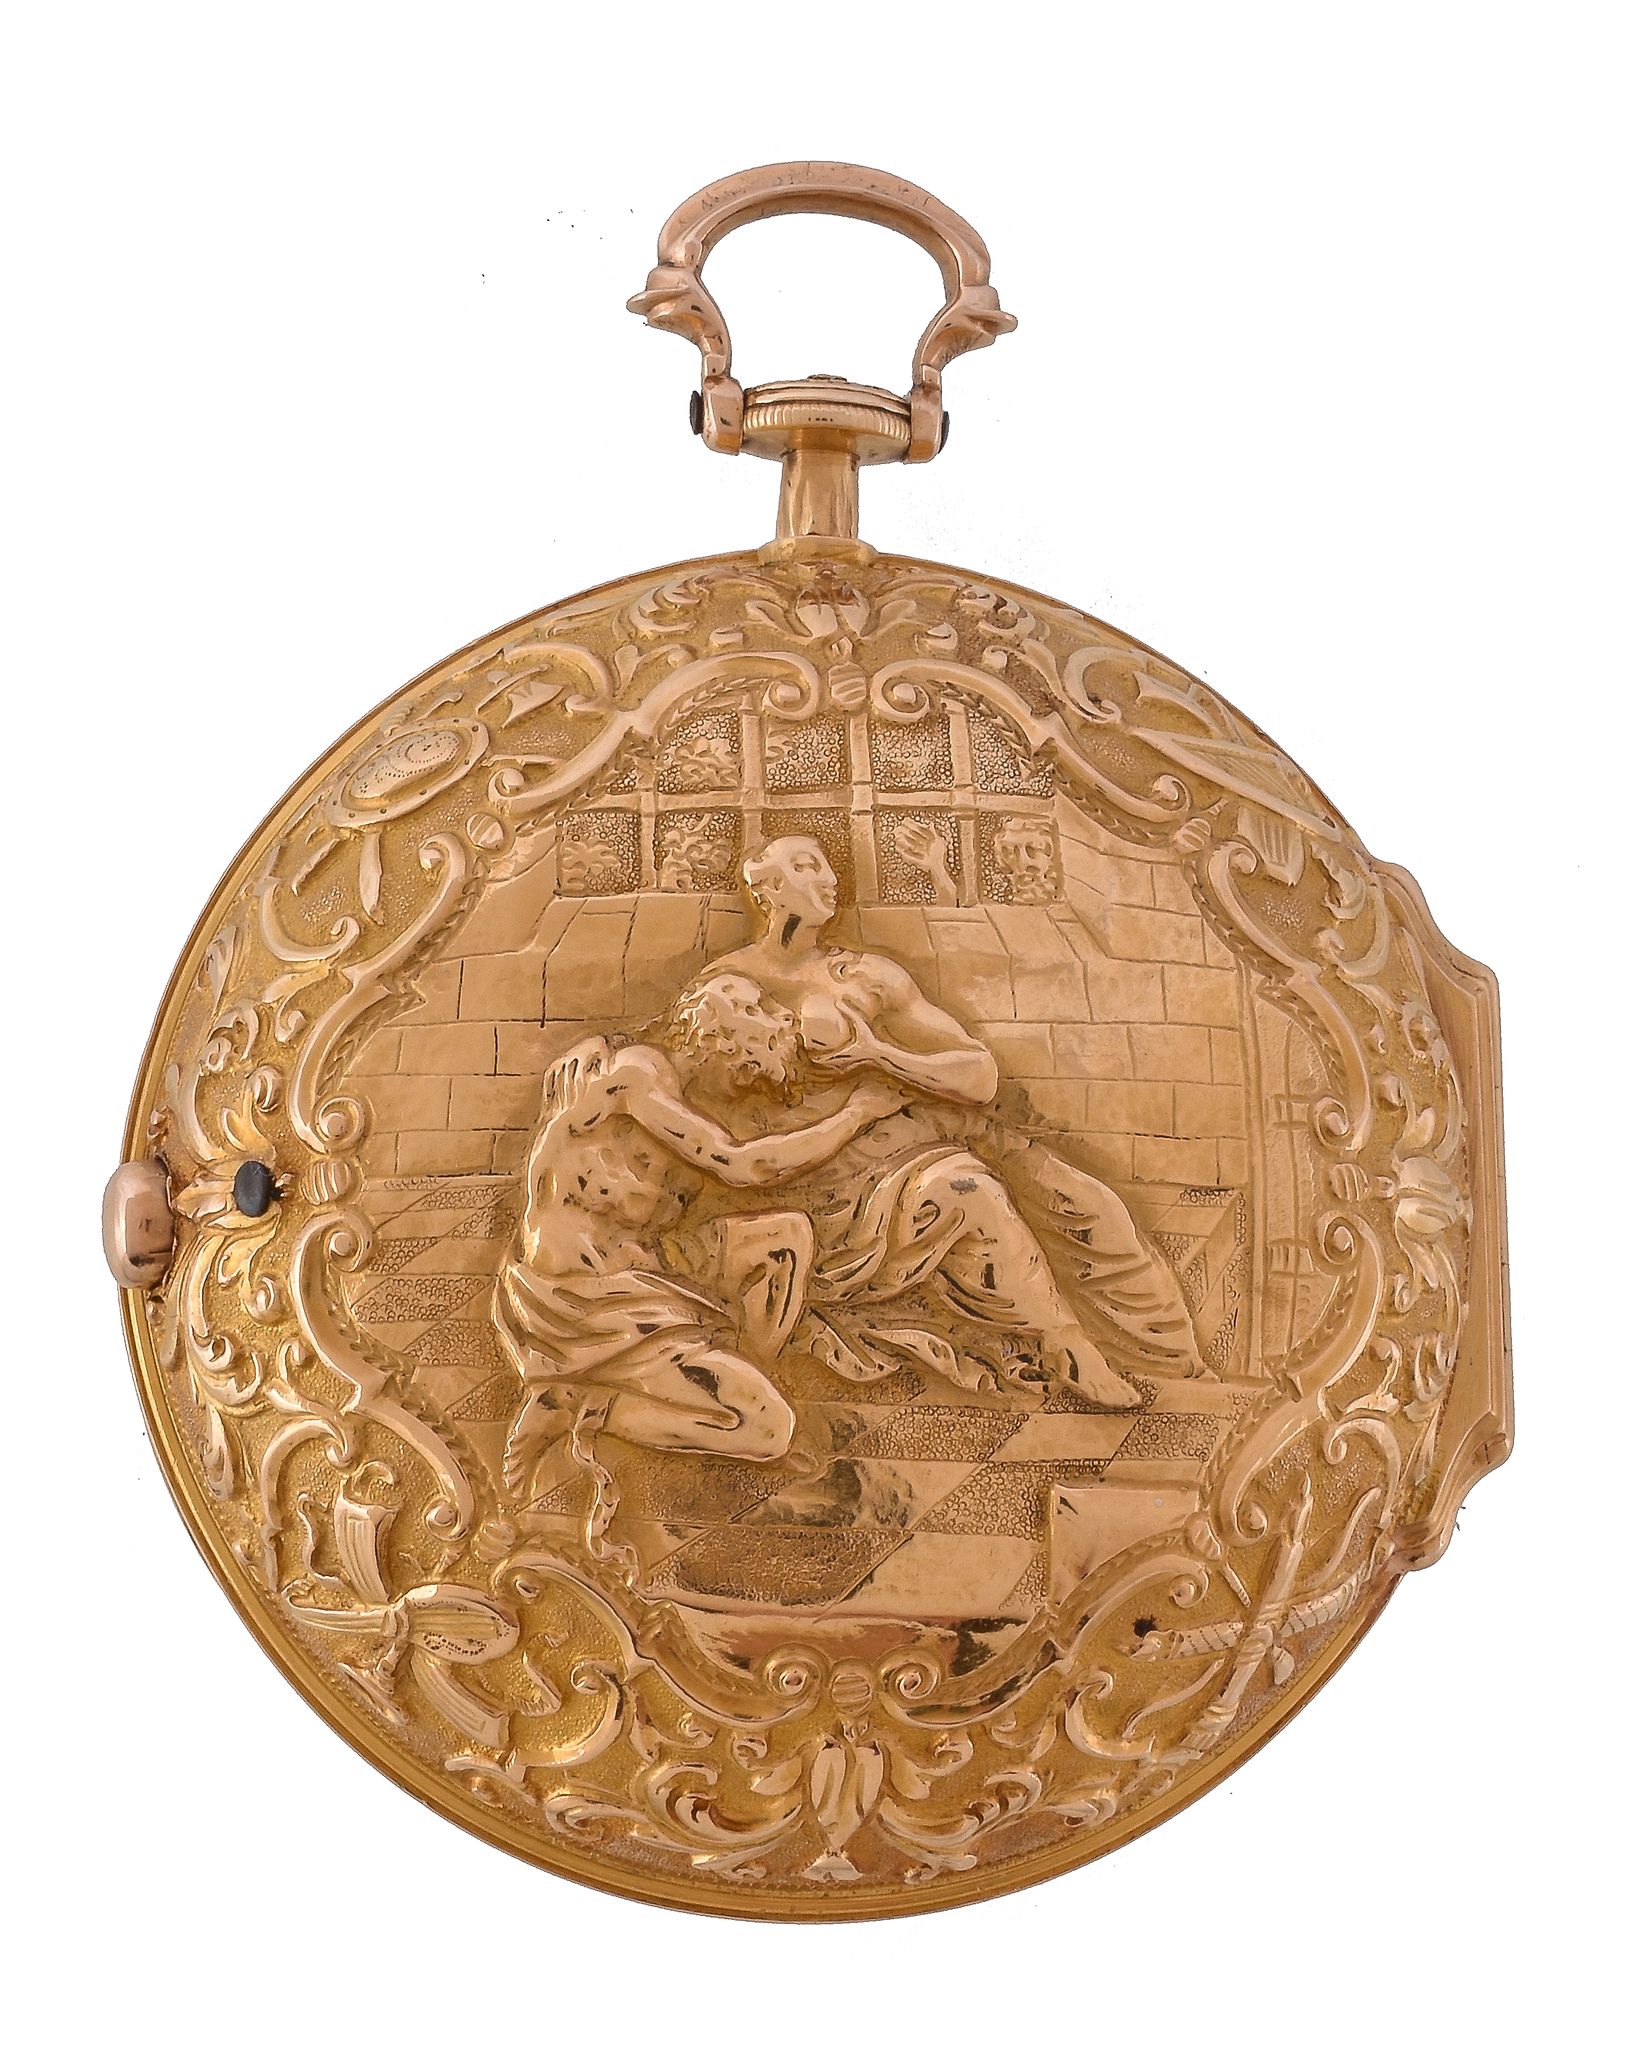 A George II gold pair-cased pocket watch with champleve dial and repousse outer case James Chater, - Image 2 of 5